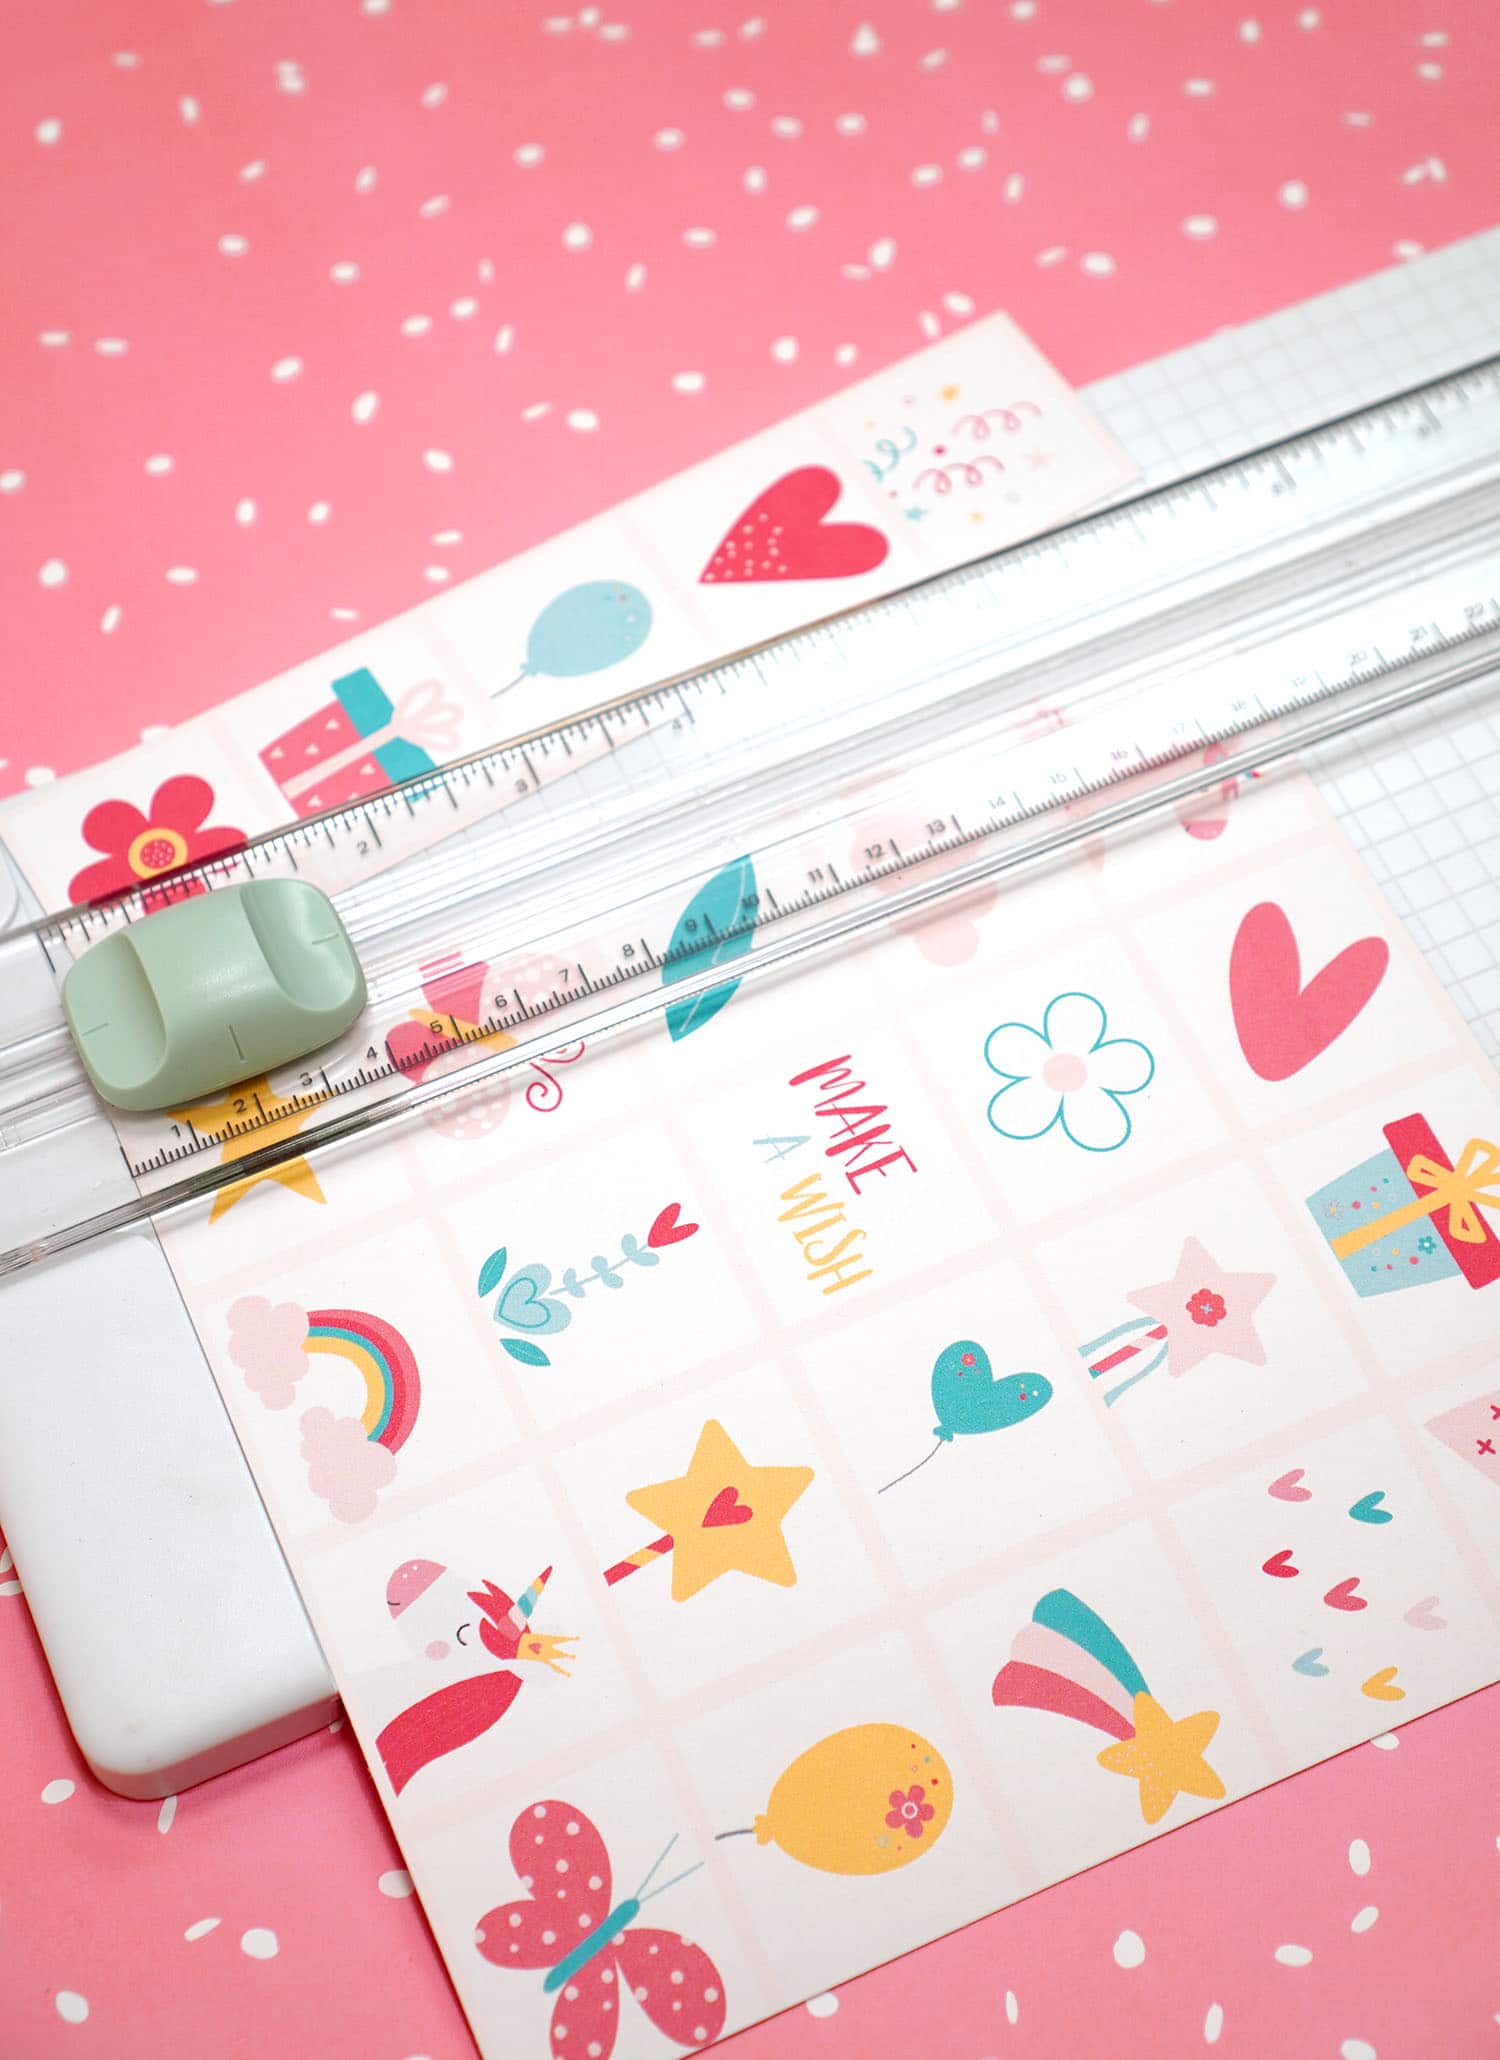 Paper trimmer cutting a sheet of Unicorn Bingo Game calling cards on a pink background